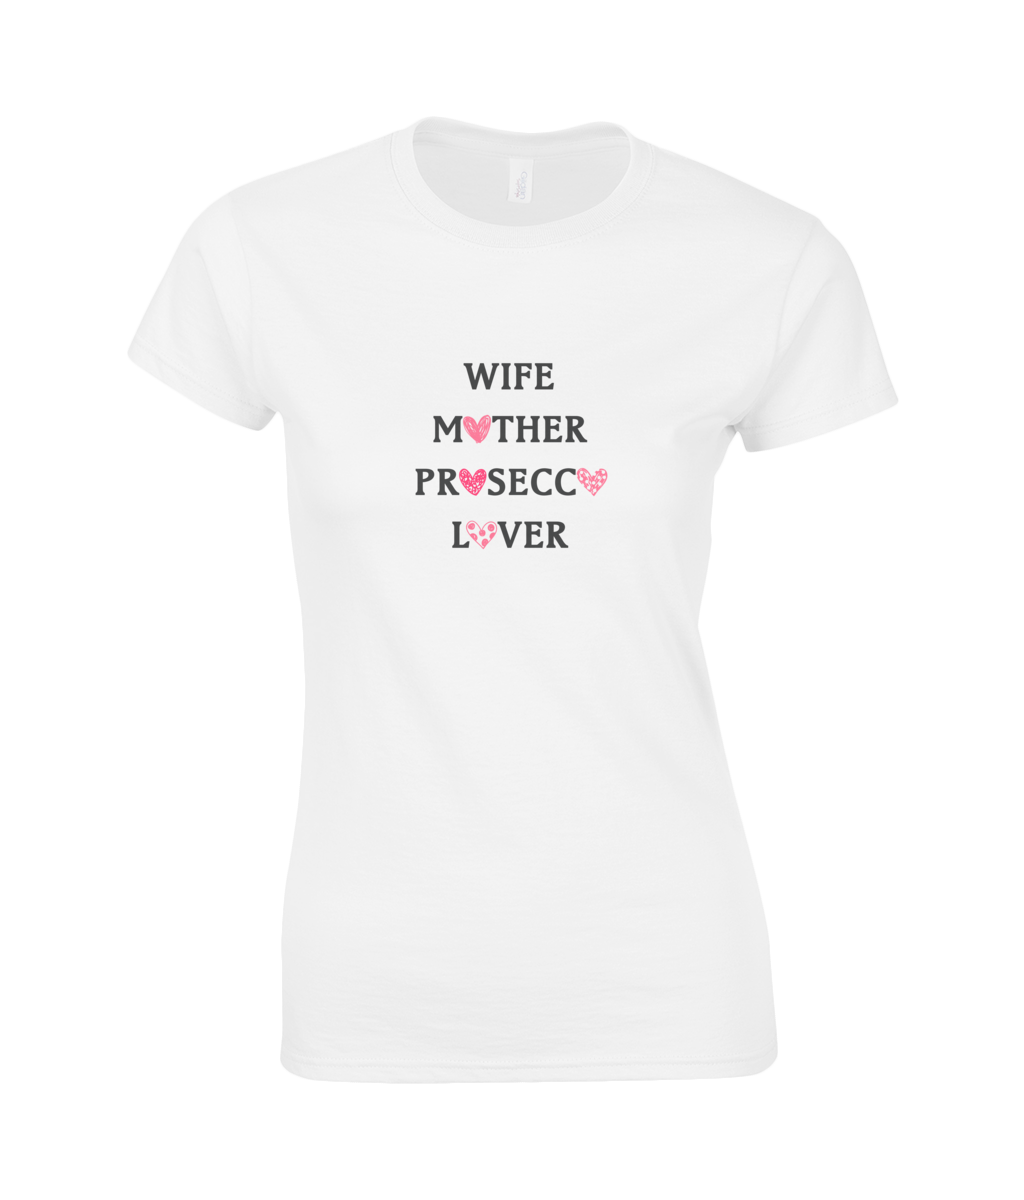 Prosecco Ladies Fitted T-Shirt